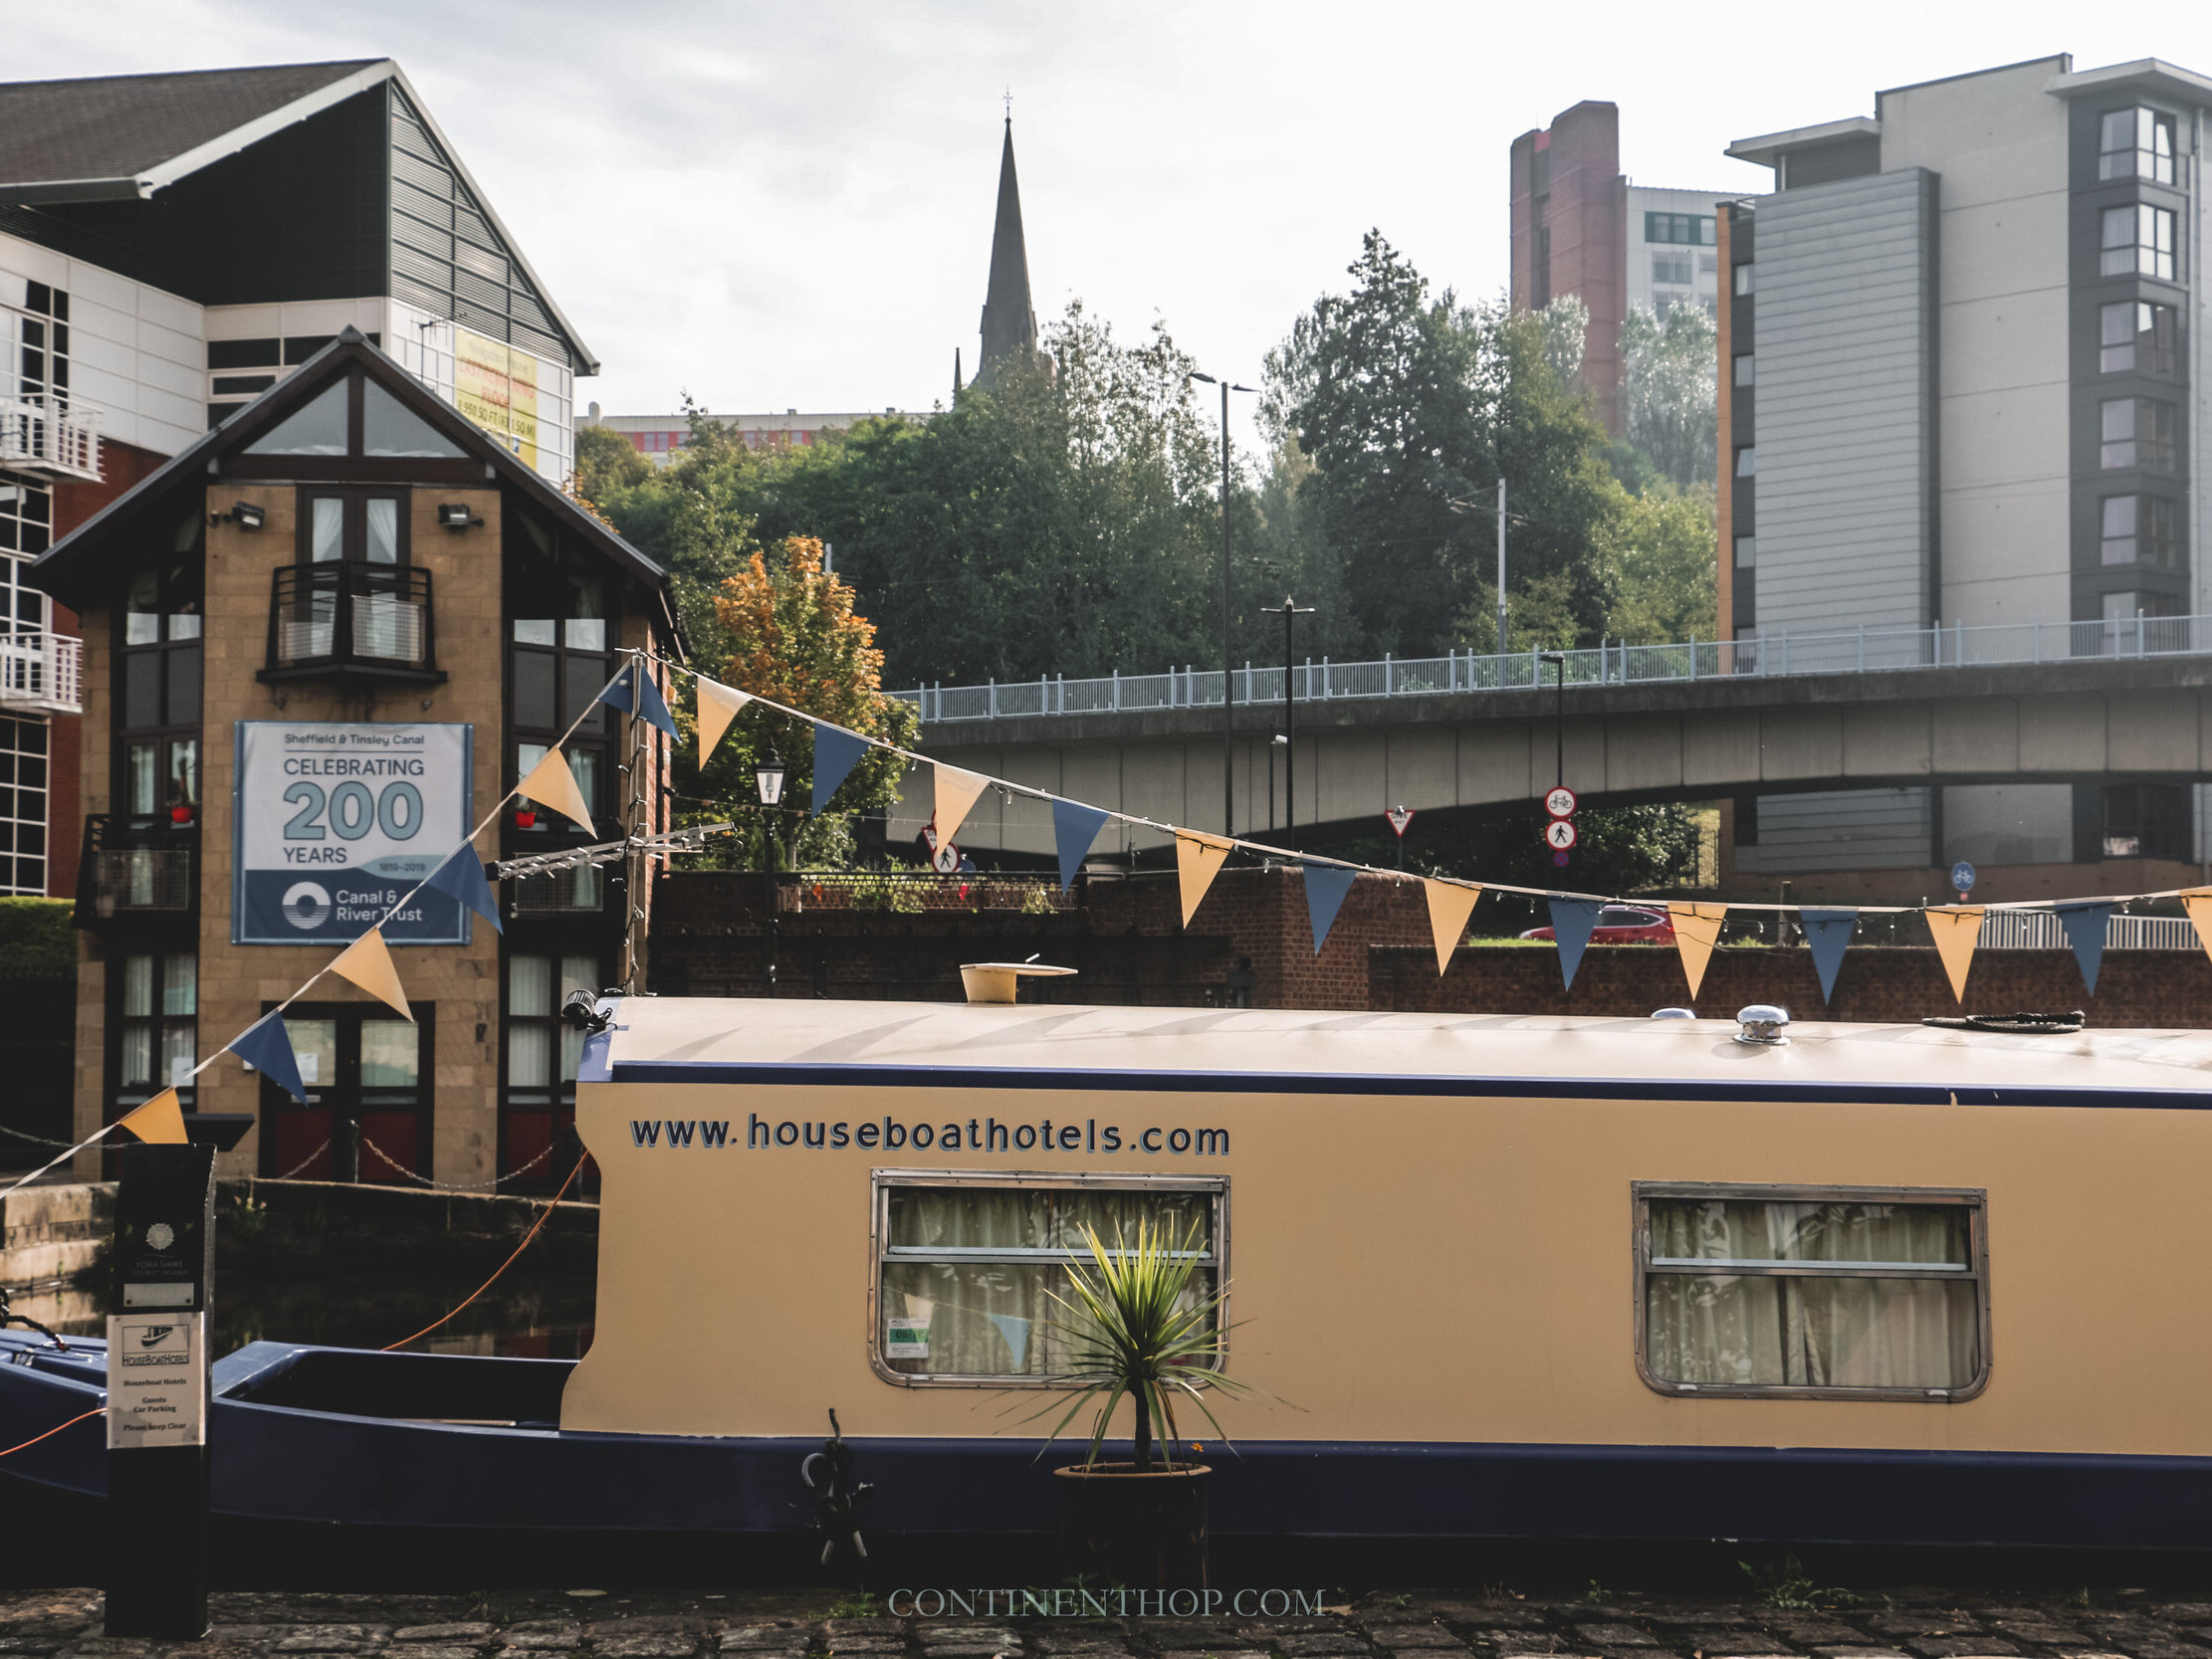 A houseboat hotel near Victoria Quays on a day out in Sheffield England